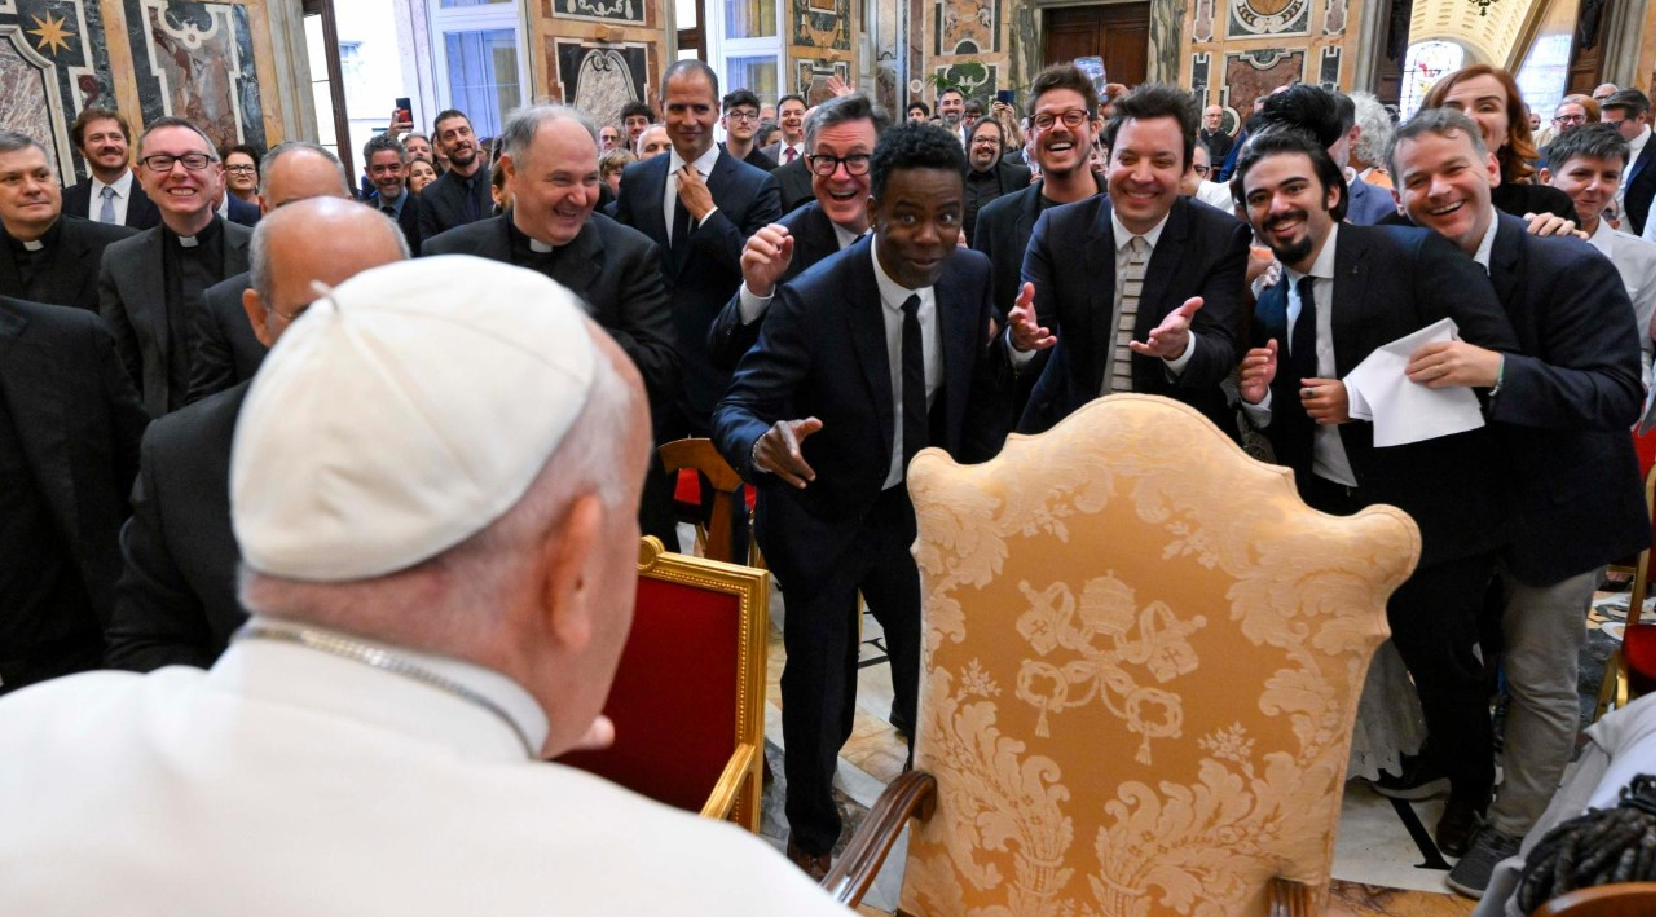 Pope Francis received in audience 107 figures from the world of humor and comedy